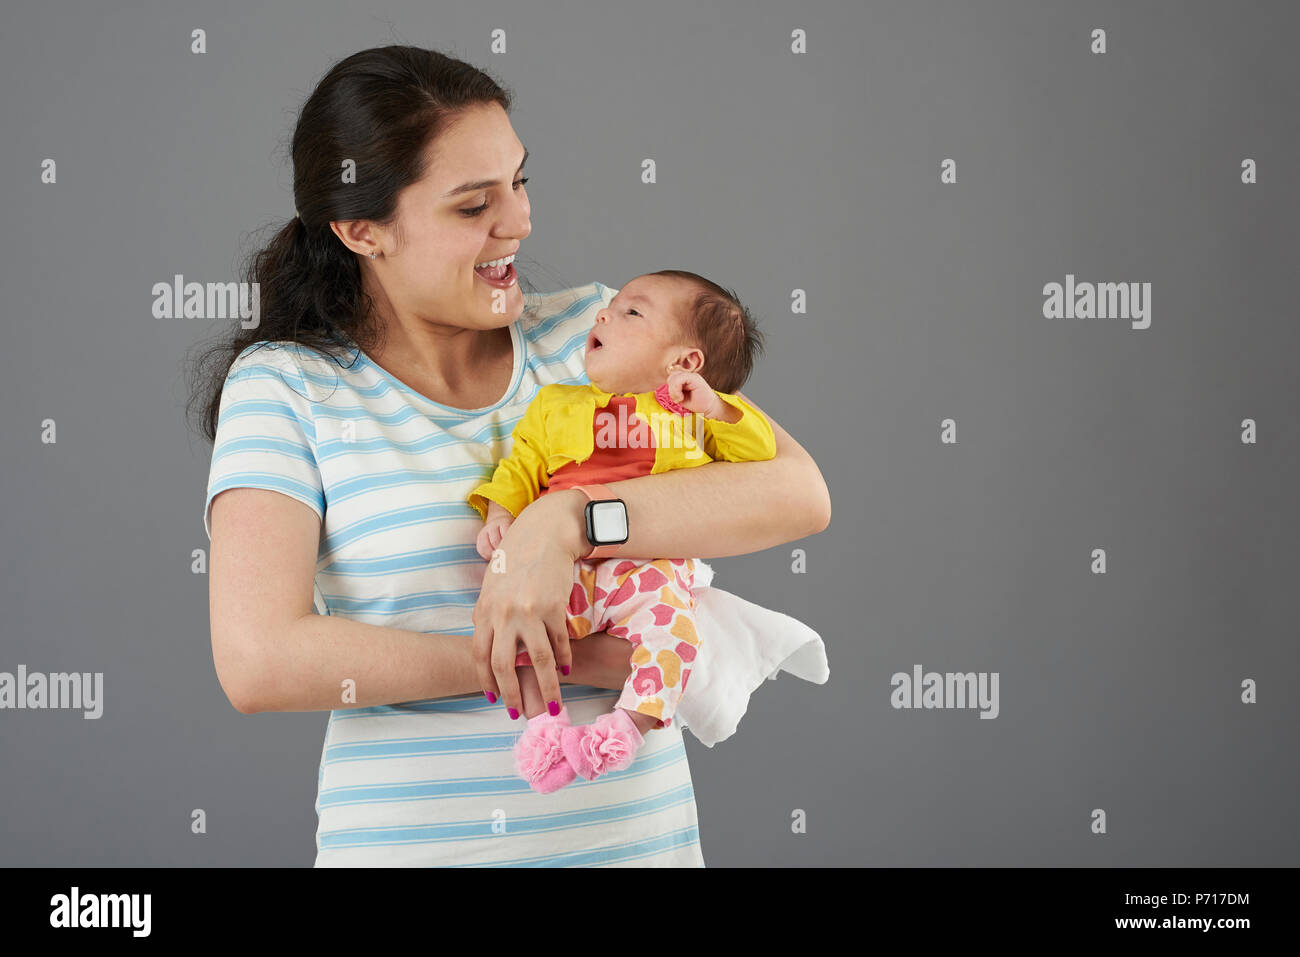 Laughing young hispanic mother with baby girl portrait isolated on gray background Stock Photo